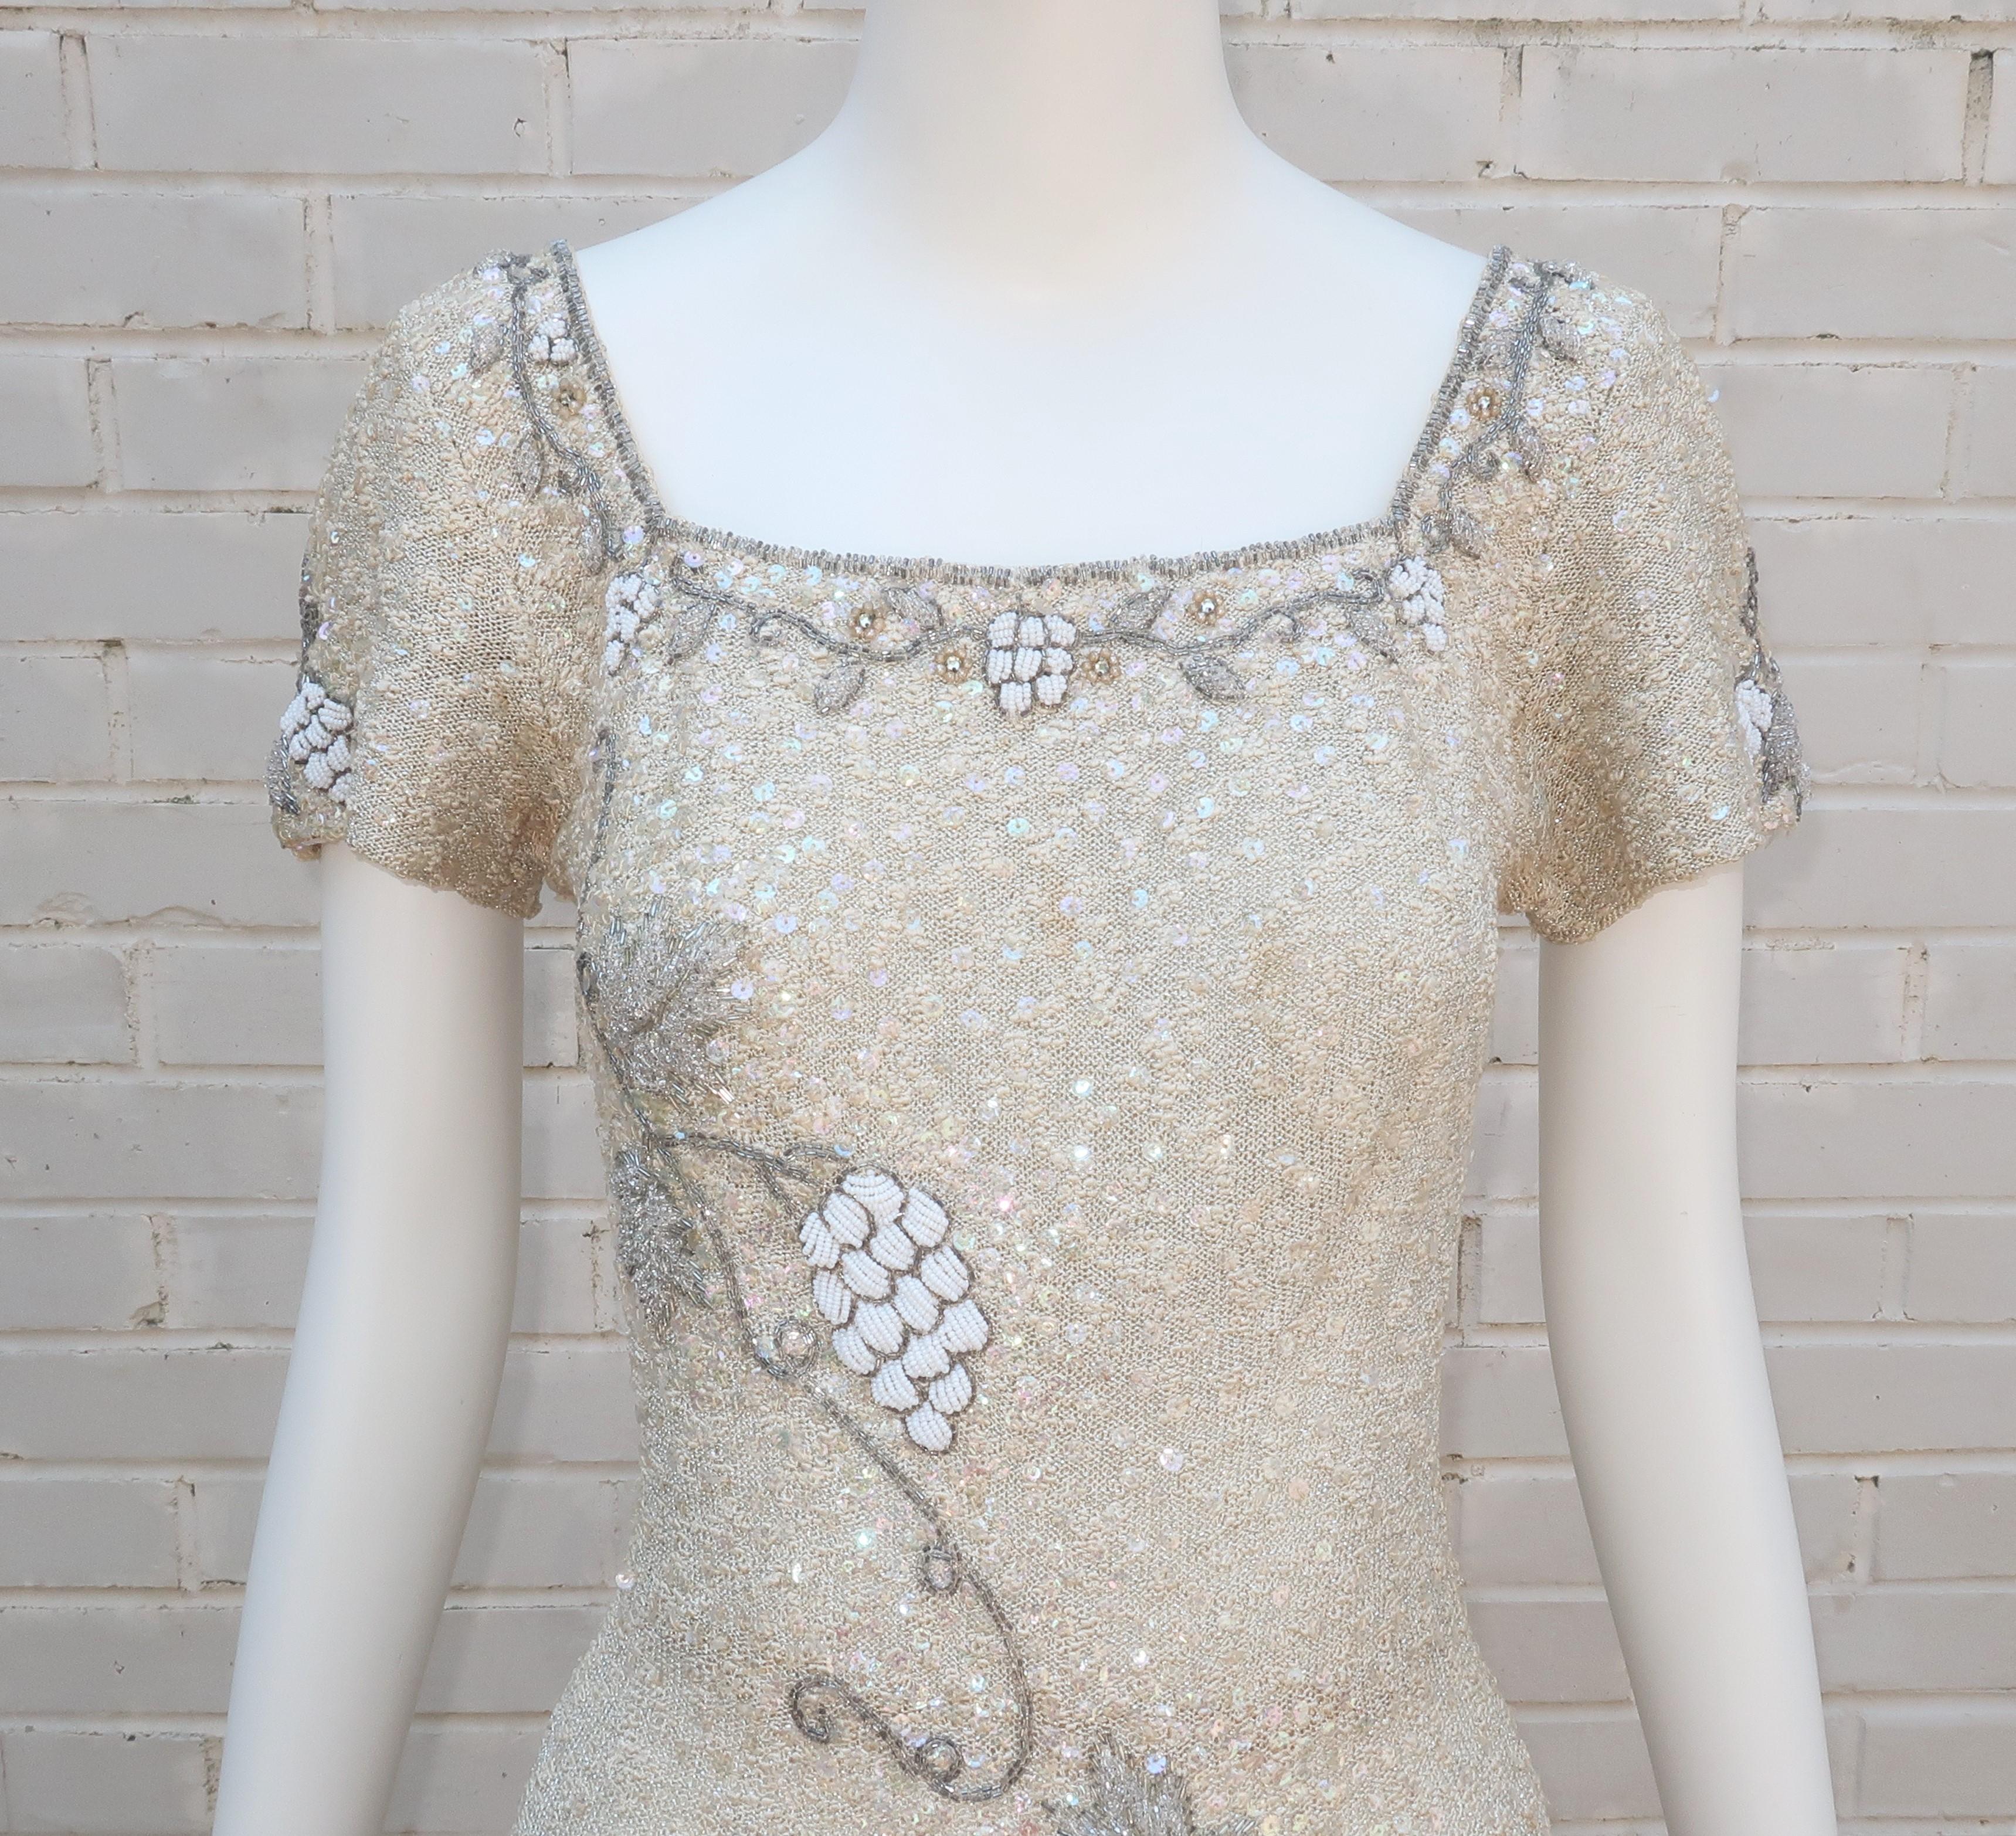 A glamorous 1950's Florence Lustig knit wear dress with shimmering all over sequins and elaborate beading in the form of a grape vine.  The off-white knit has a silvery Lurex sparkle and nubby style finish which provides a body conscious silhouette